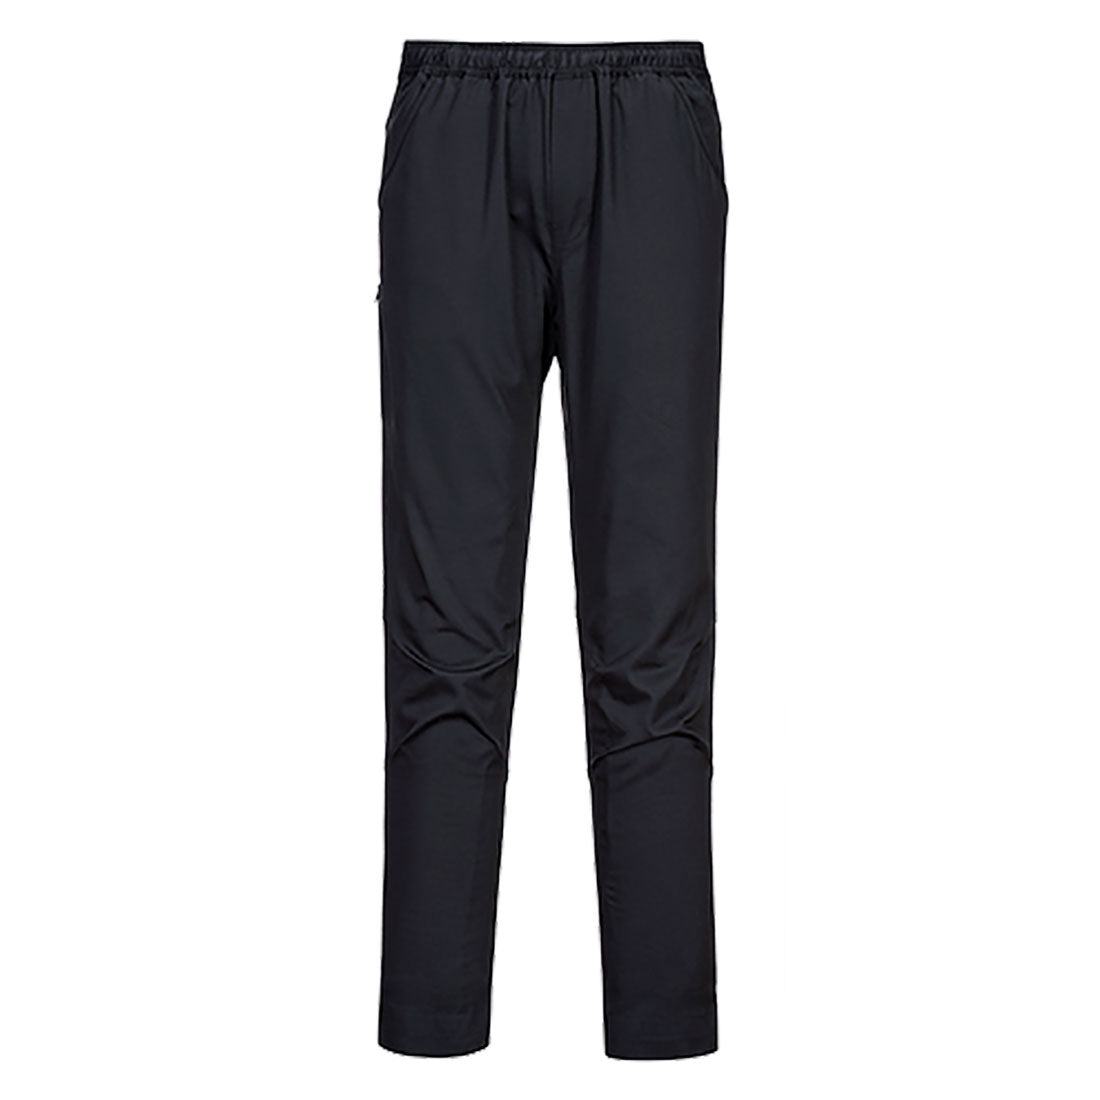 BLACK BRAND NEW Work Trousers Catering - Size Small - Fusion CCTR1 £10.50 -  PicClick UK